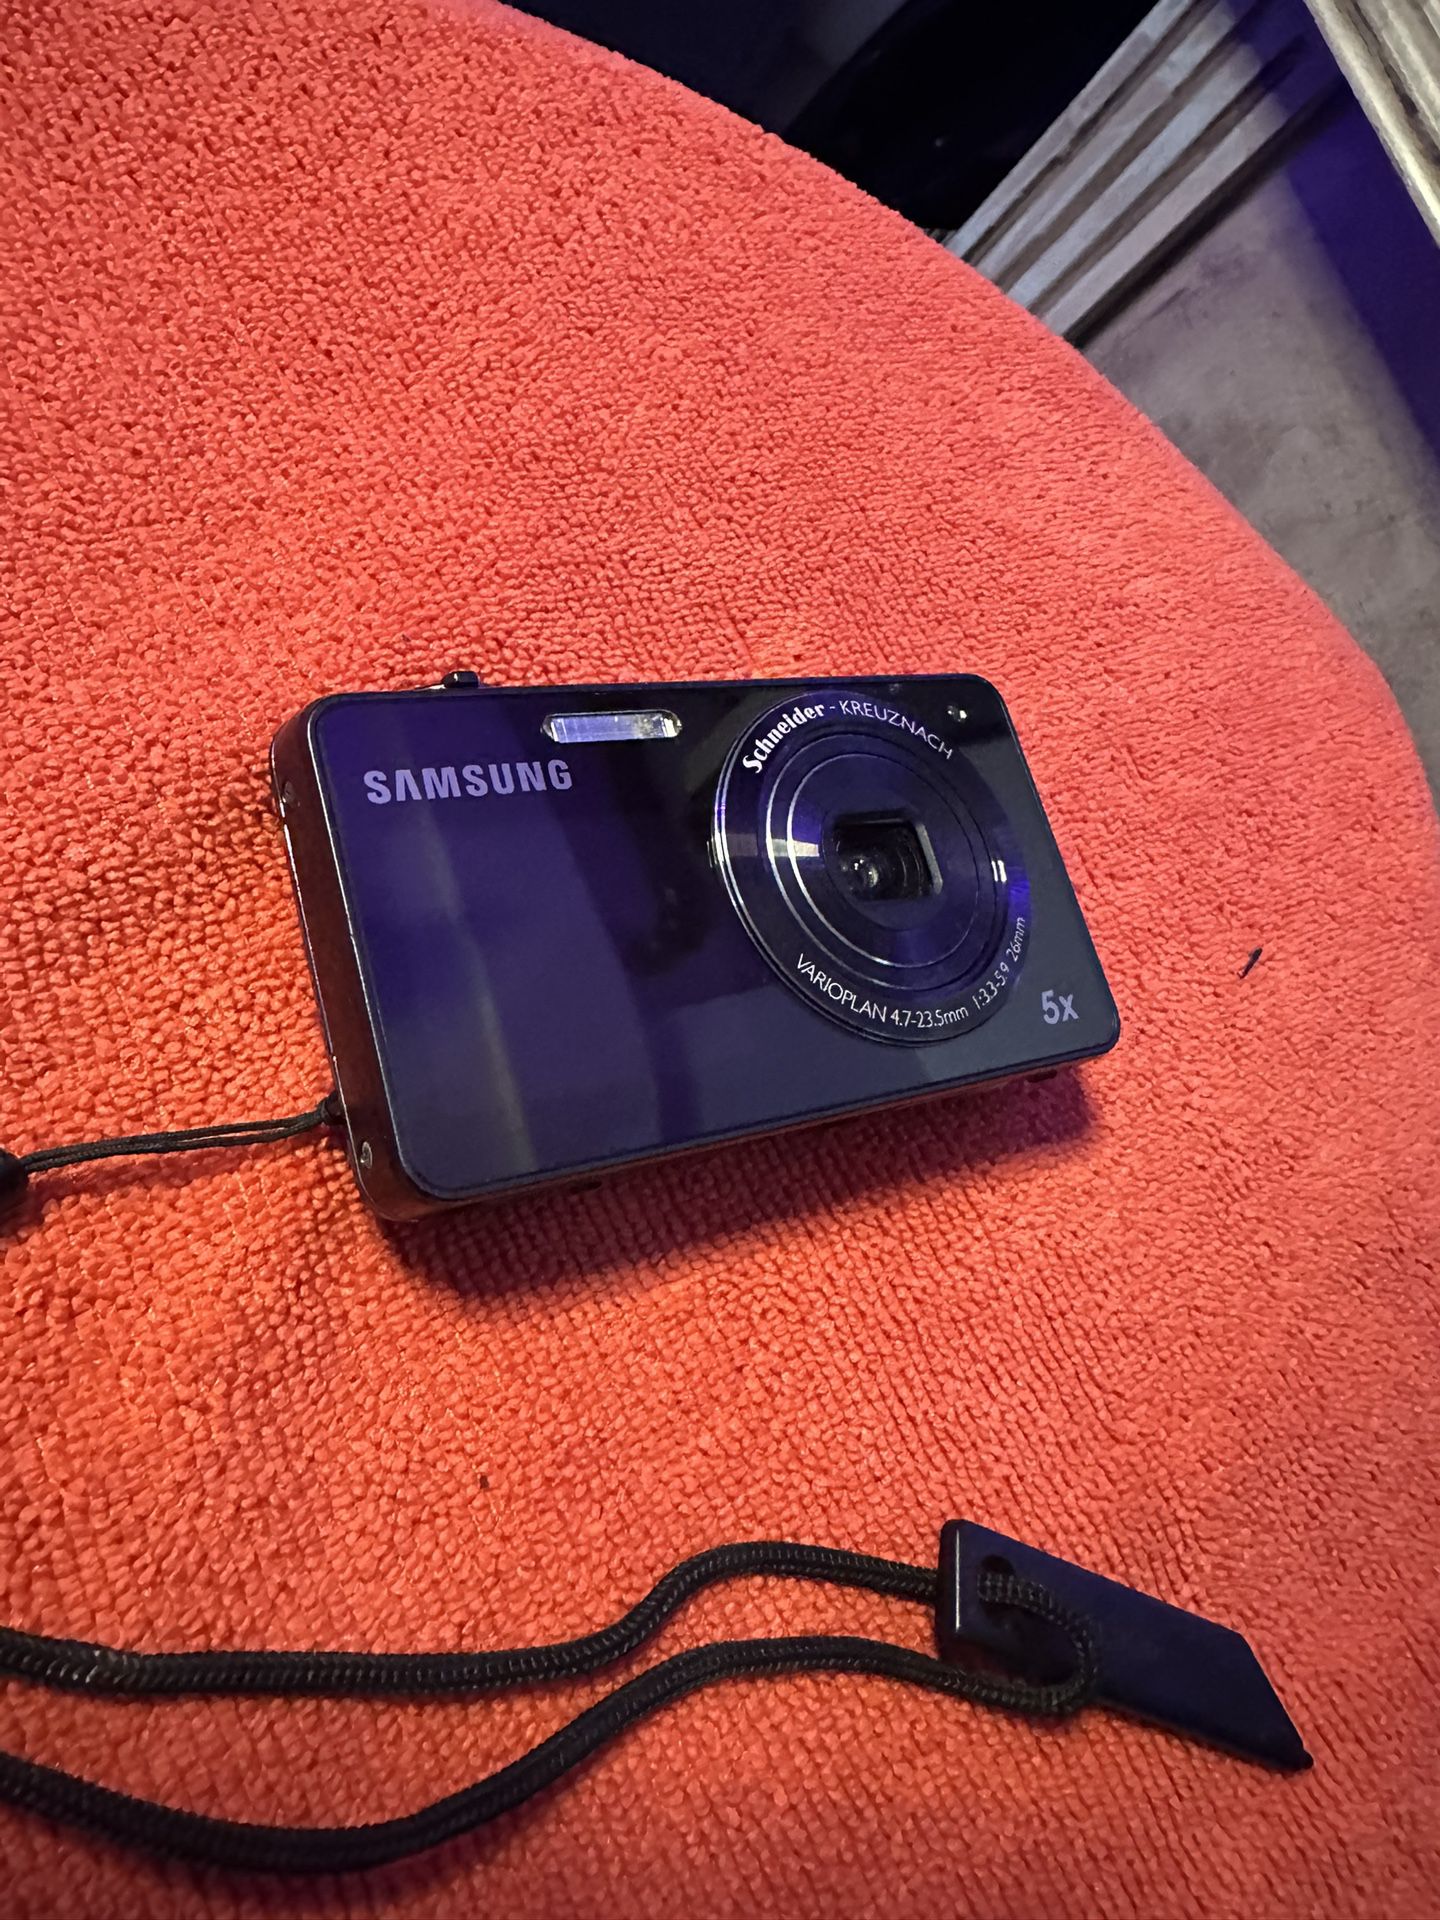 Samsung Point And Shoot Camera Digicam With Case